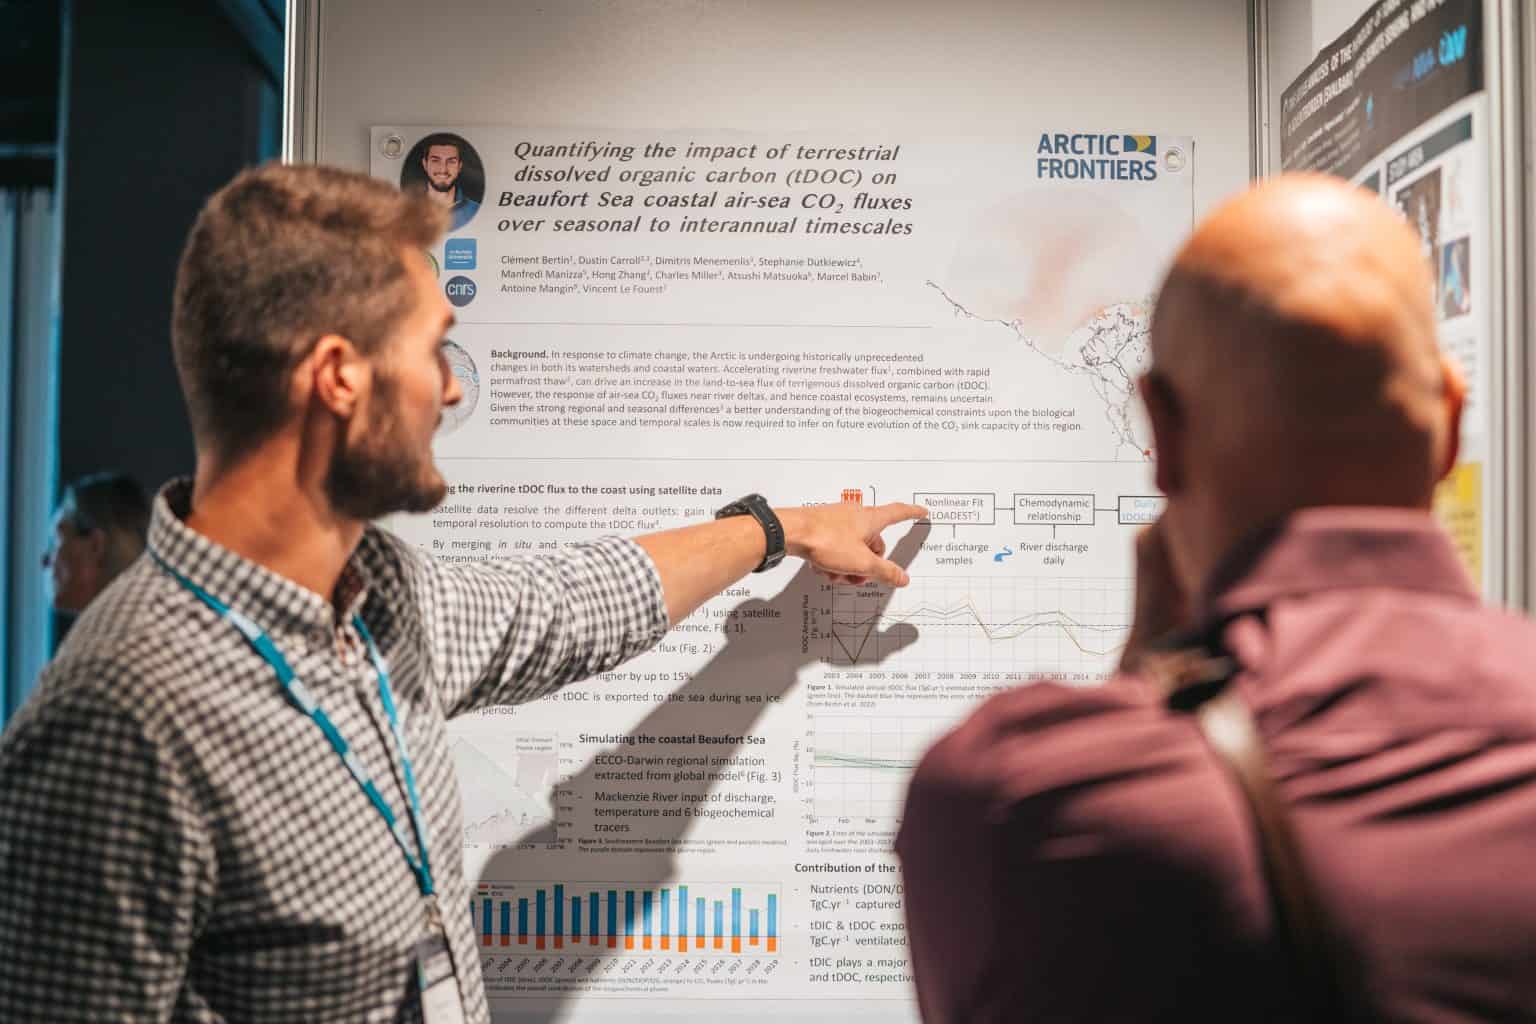 Two men stand beside a scientific poster. The photo is shot from behind them. The man on the left points at something on the poster.